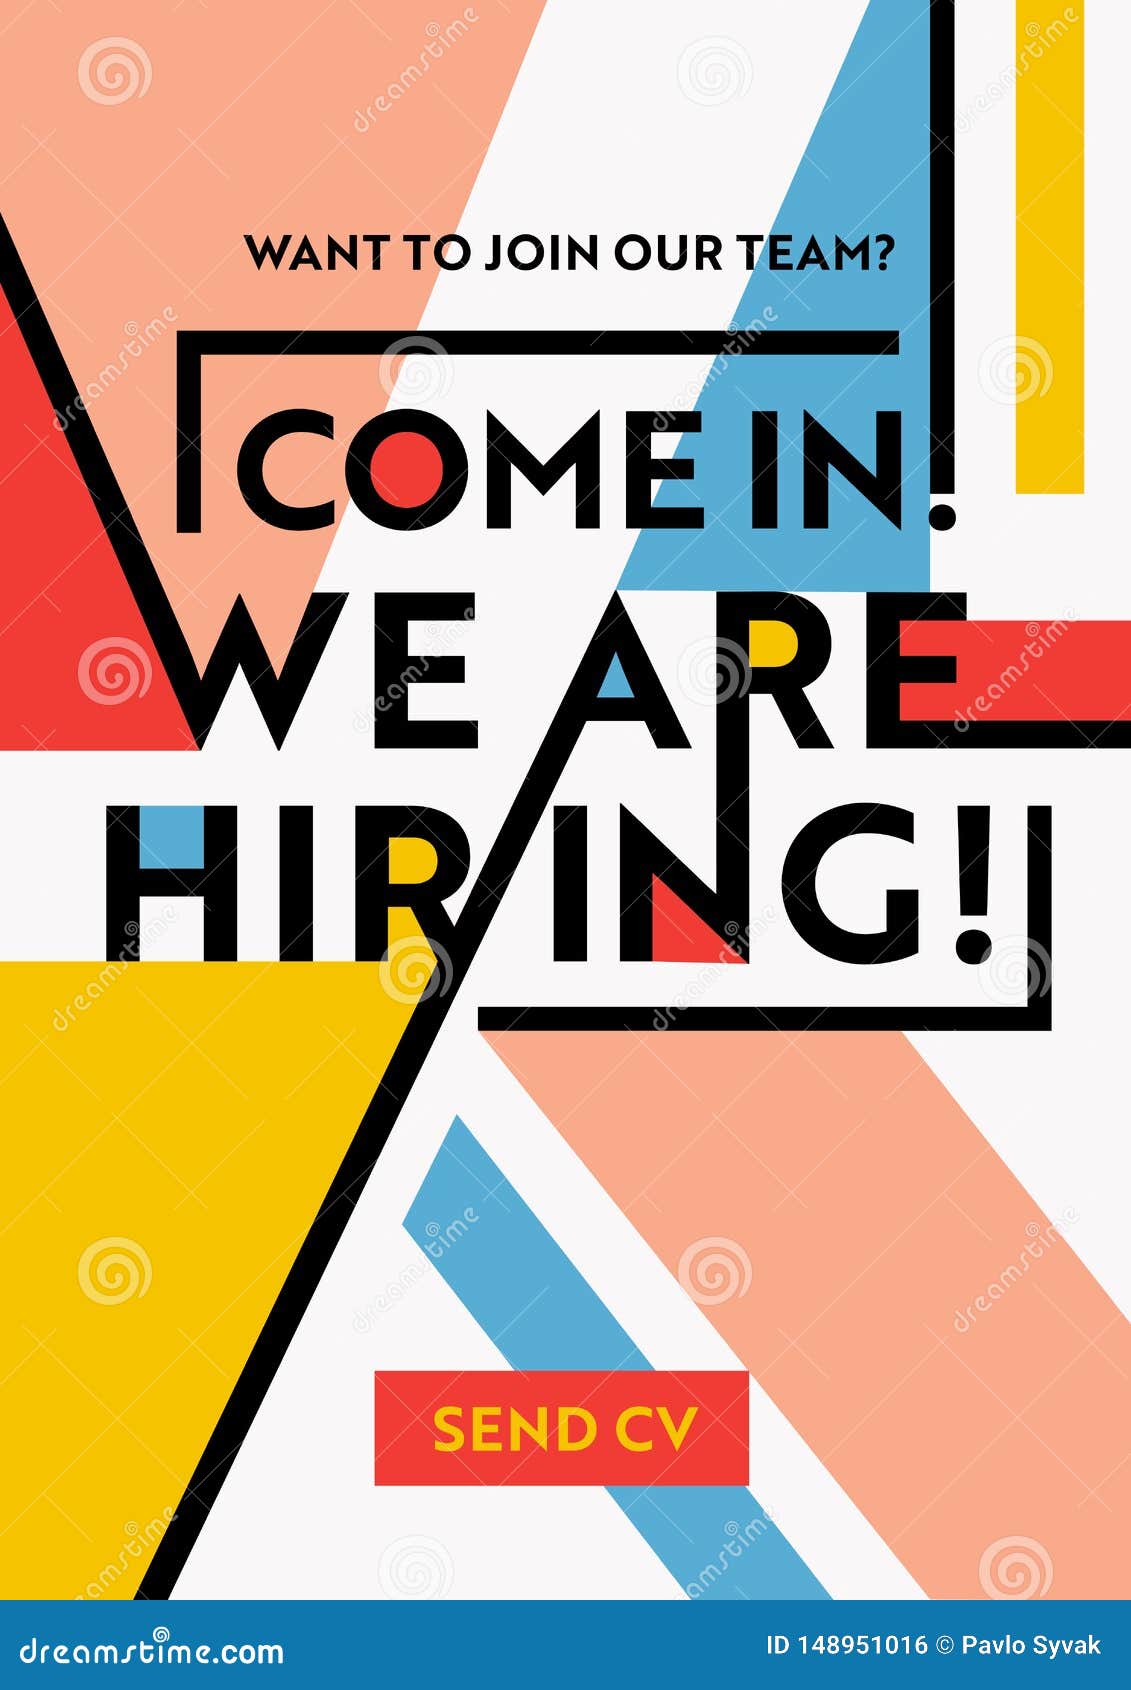 We are hiring poster background office chair Vector Image